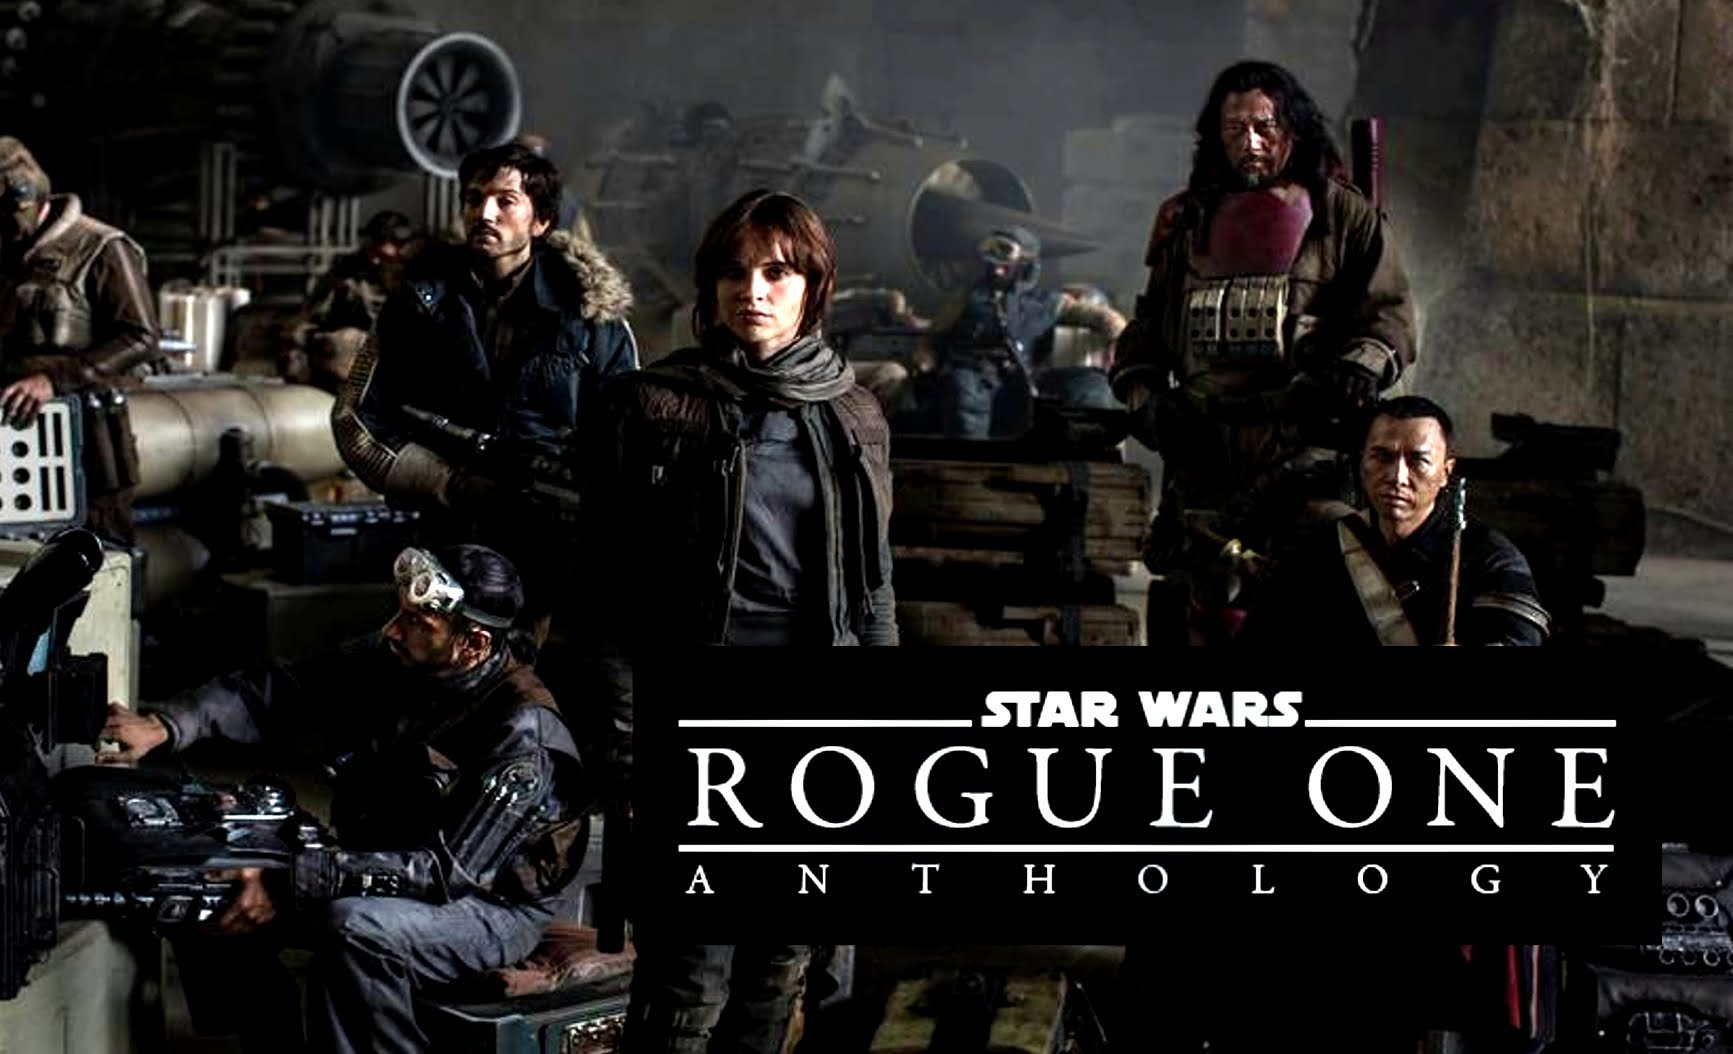 rogue, One, Star, Wars, Story, Sci fi, Space, Futuristic, Opera, 1rosw, Disney, Action, Fighting, Poster Wallpaper